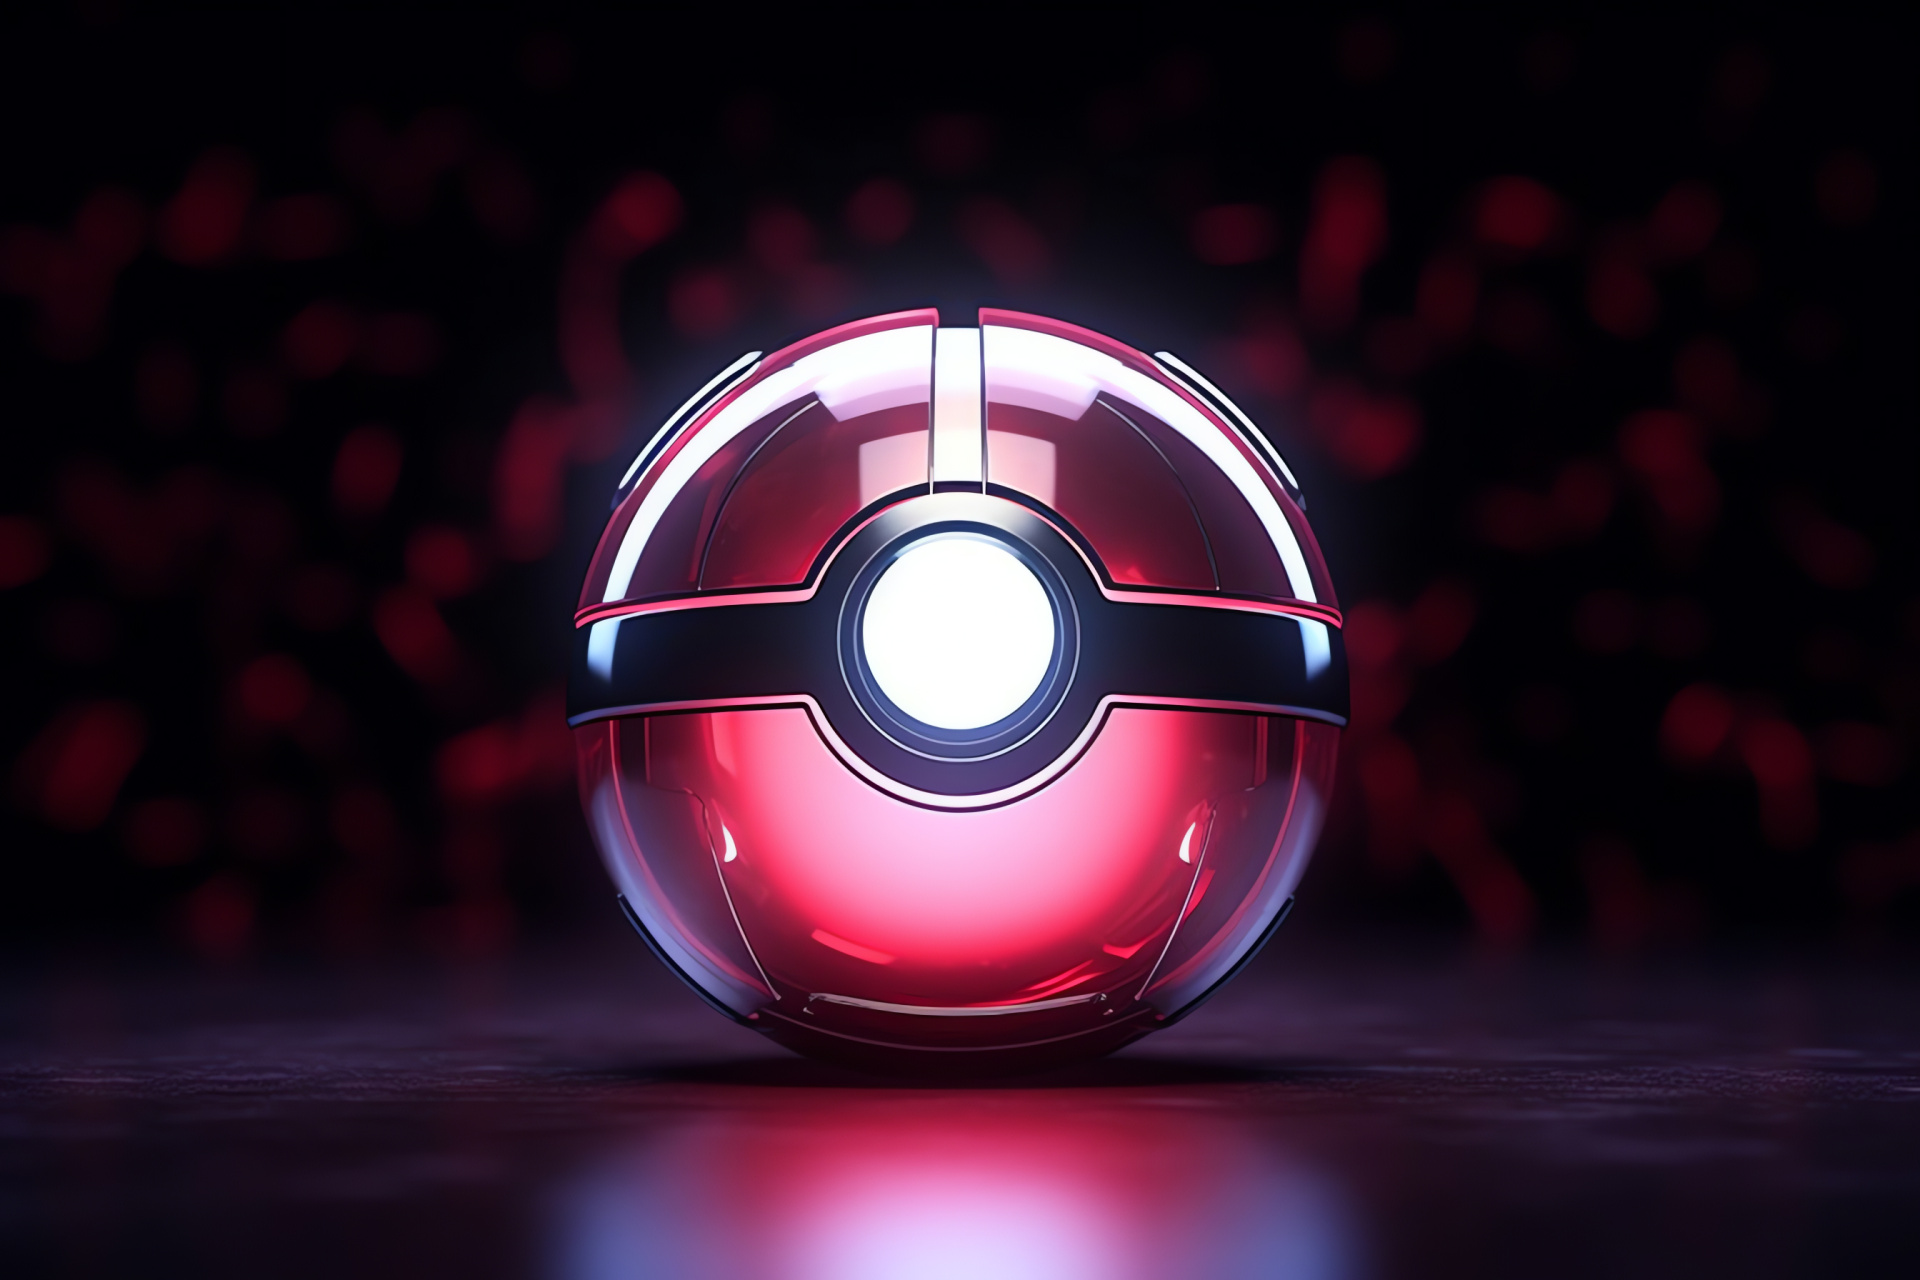 Pokeball, Gaming accessory, Iconic Pokeball design, Pokmon catching device, Red and white sphere, HD Desktop Wallpaper